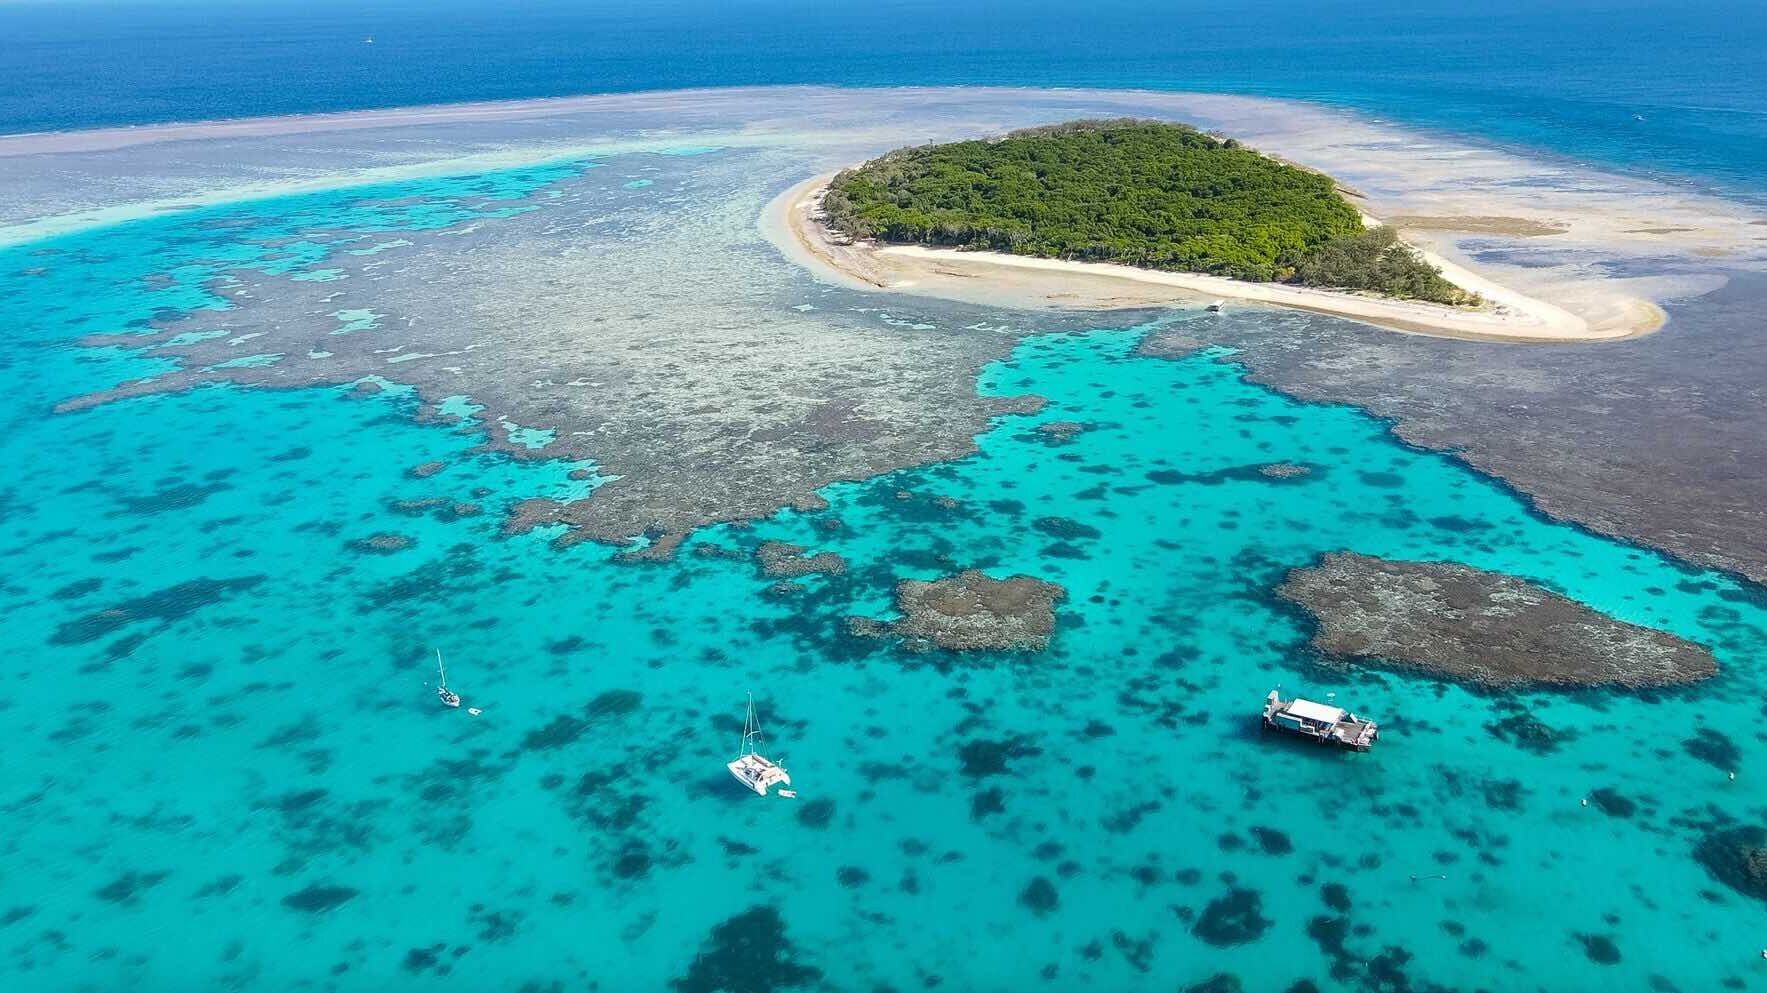 Aerial view of lady Musgrave island and the great barrier reef, queensland, Australia 